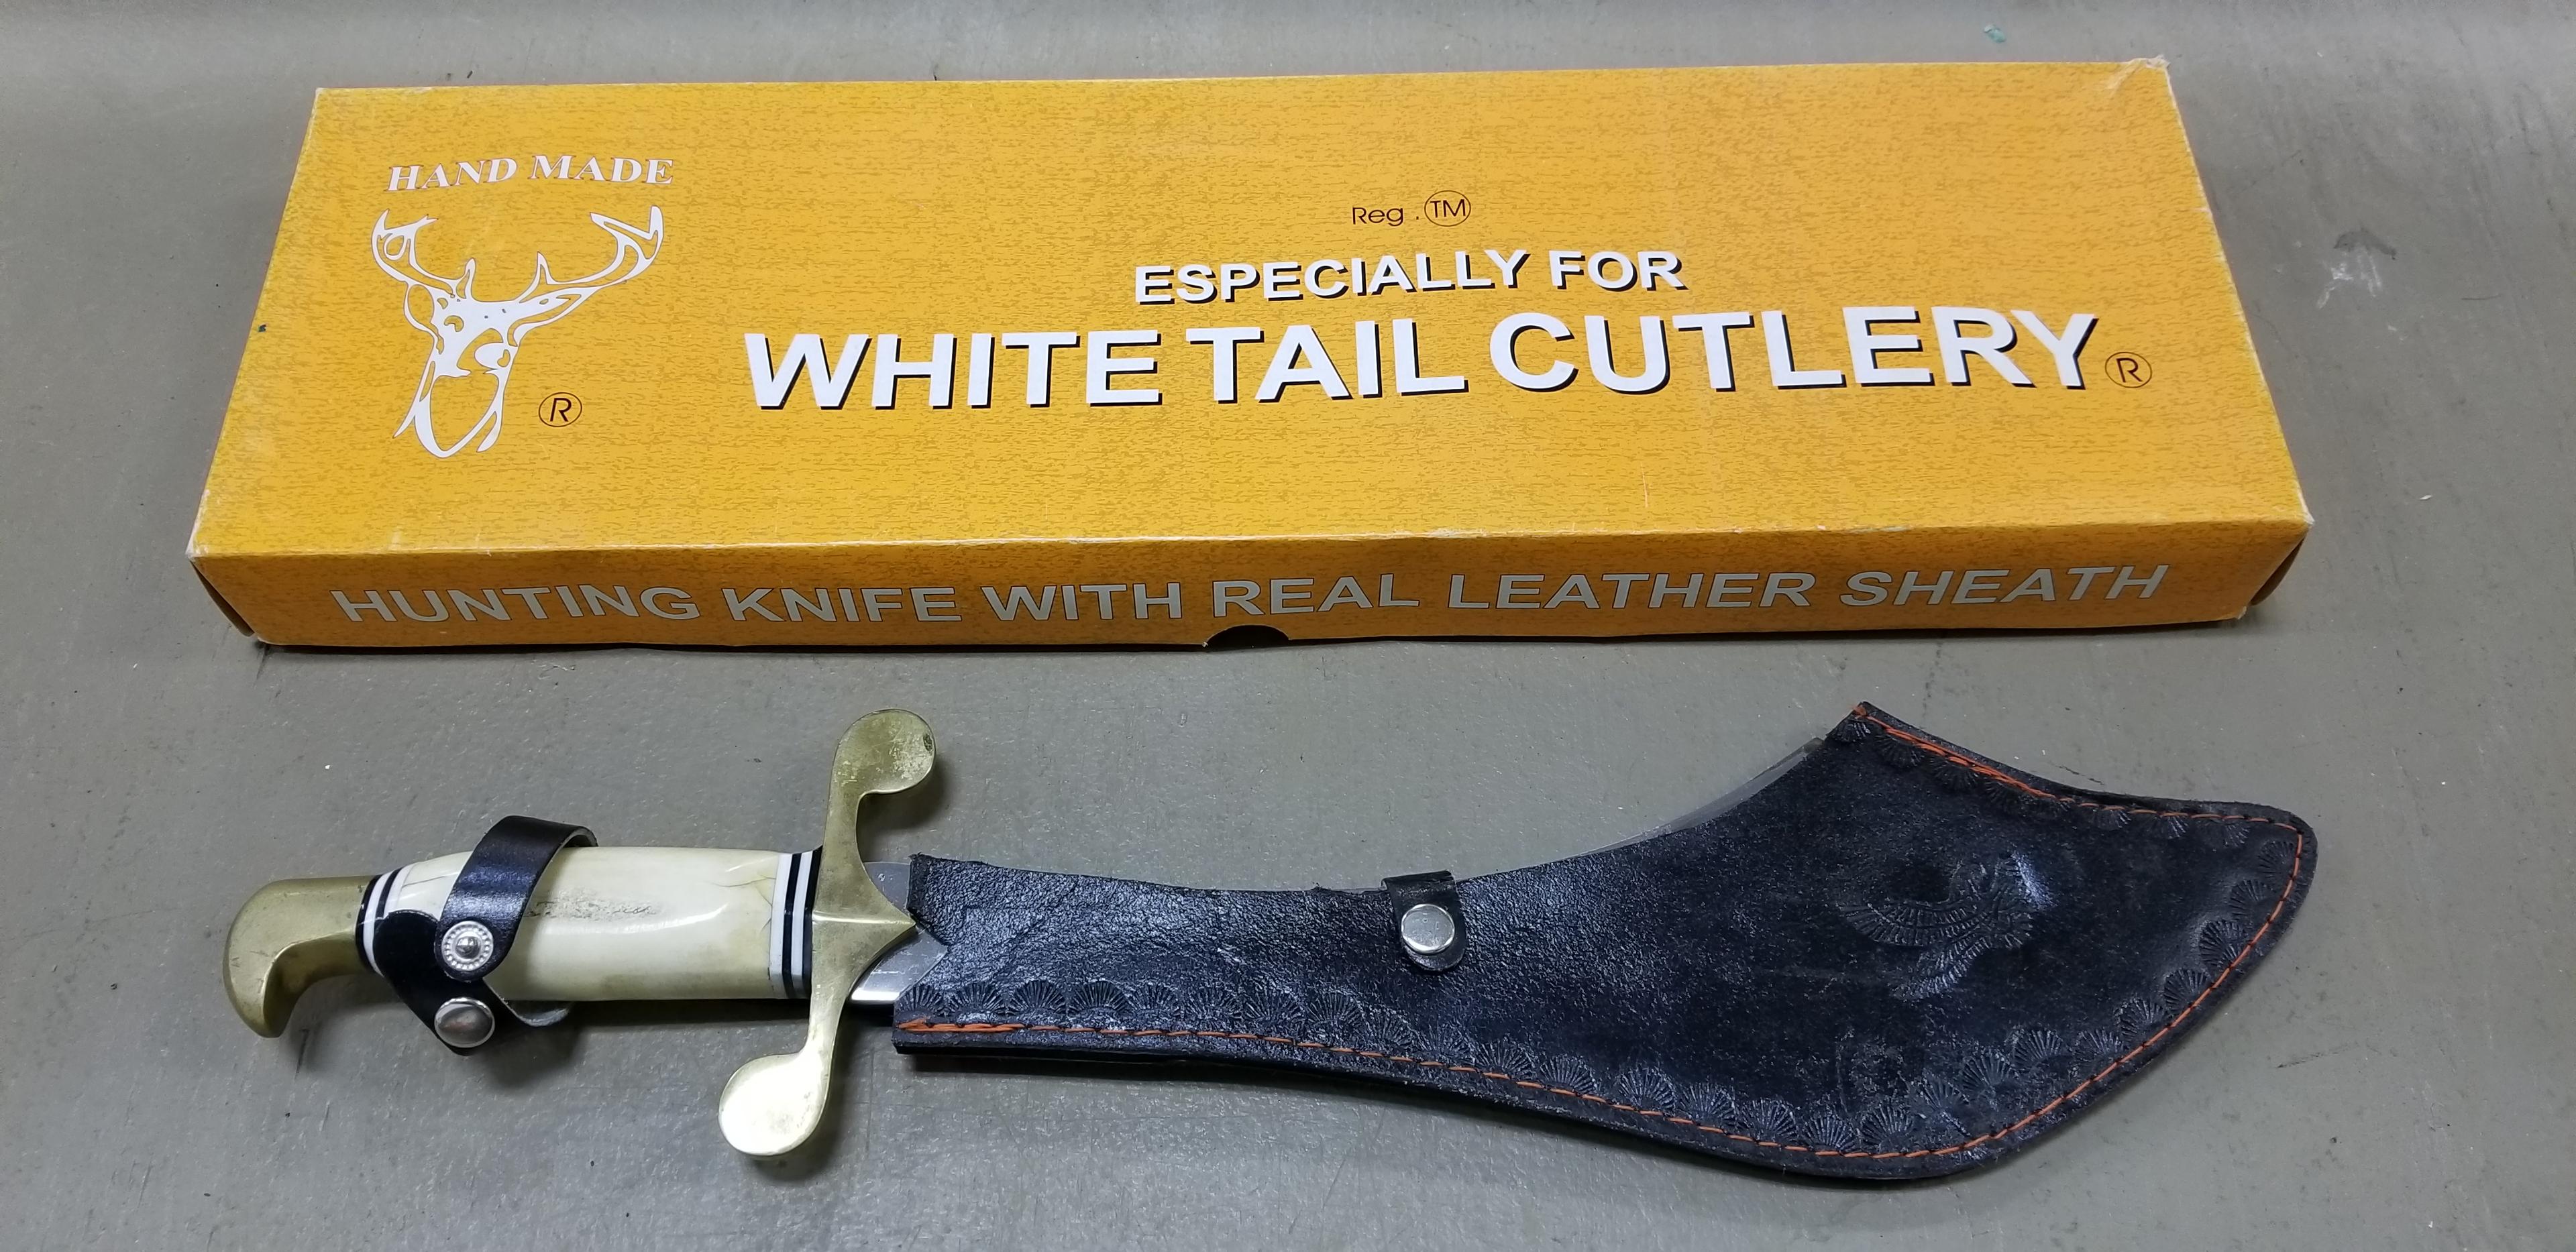 WHITE TAIL CUTLERY 12 3/4" STAG HANDLED HUNTING KNIFE - NIB